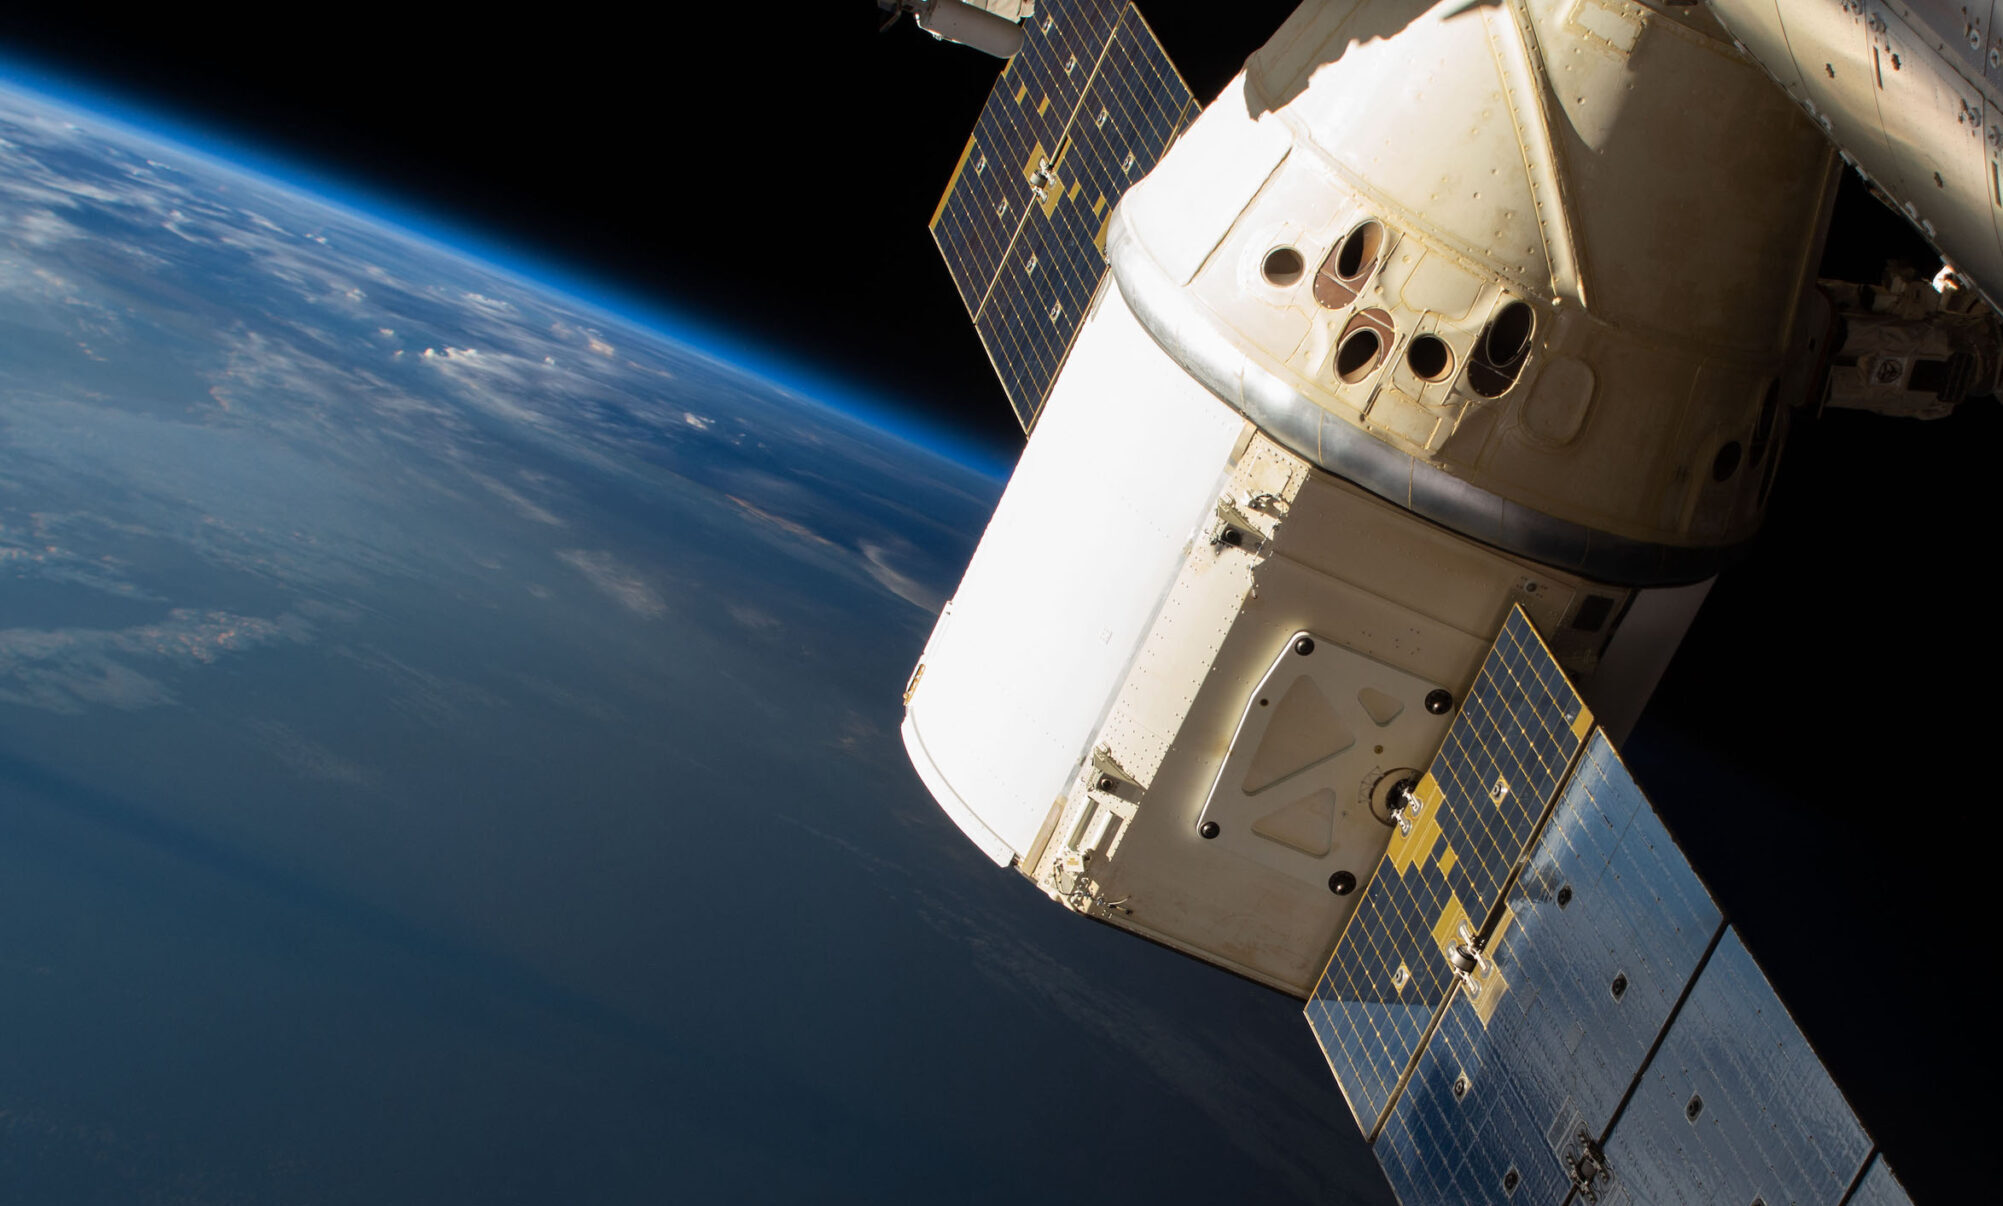 SpaceX Dragon cargo craft attached to the International Space Station. Photo credit: NASA